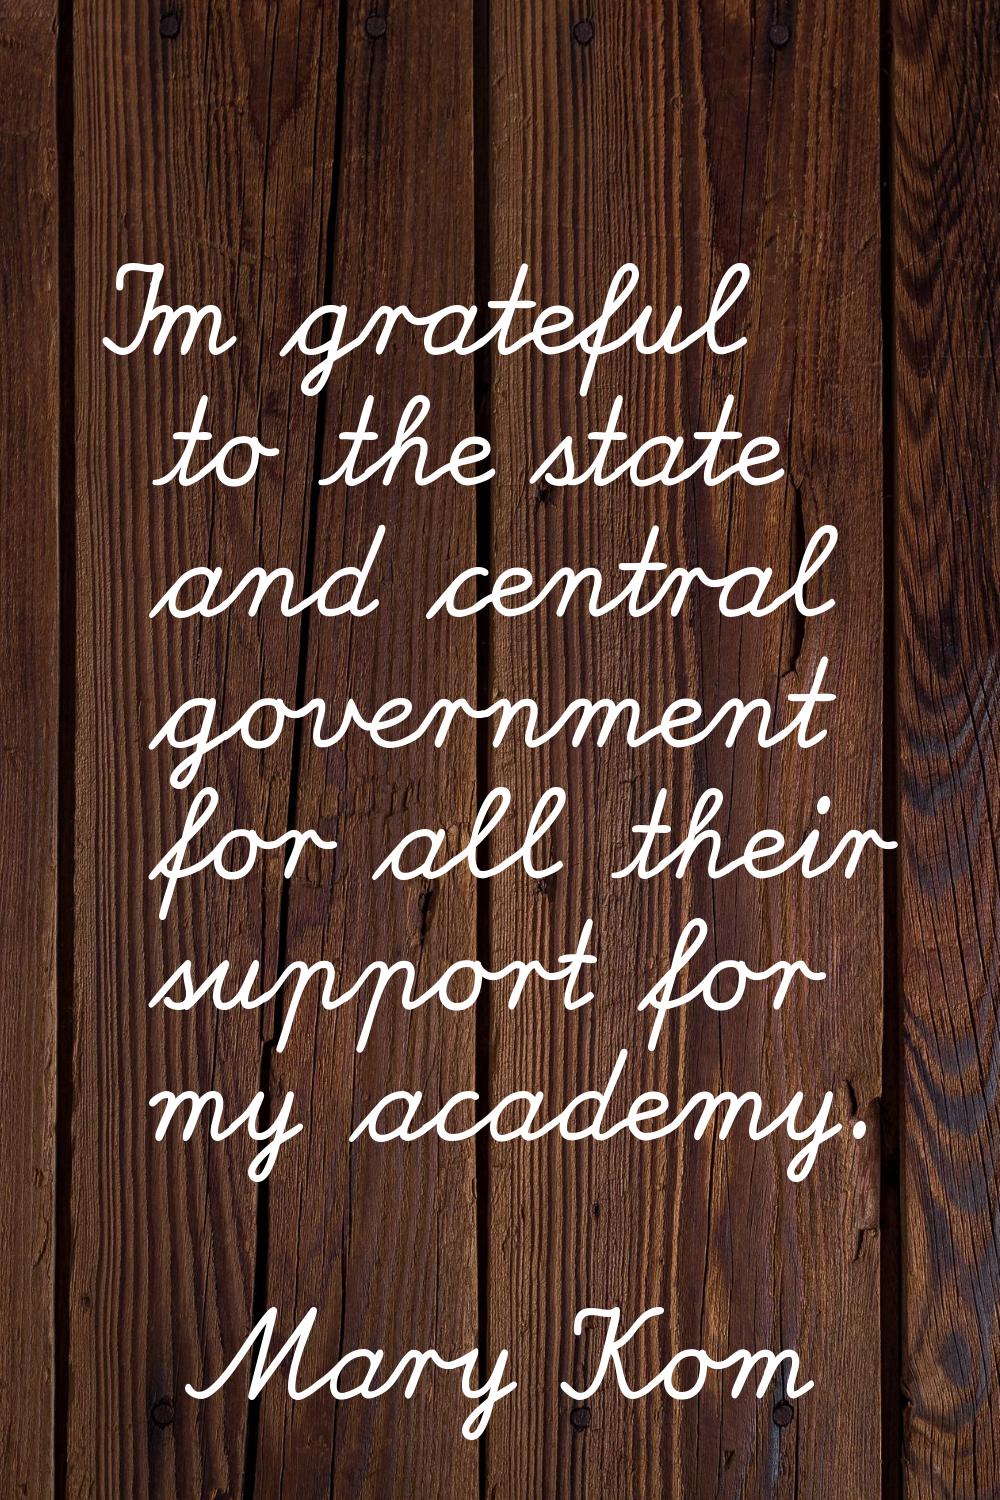 I'm grateful to the state and central government for all their support for my academy.